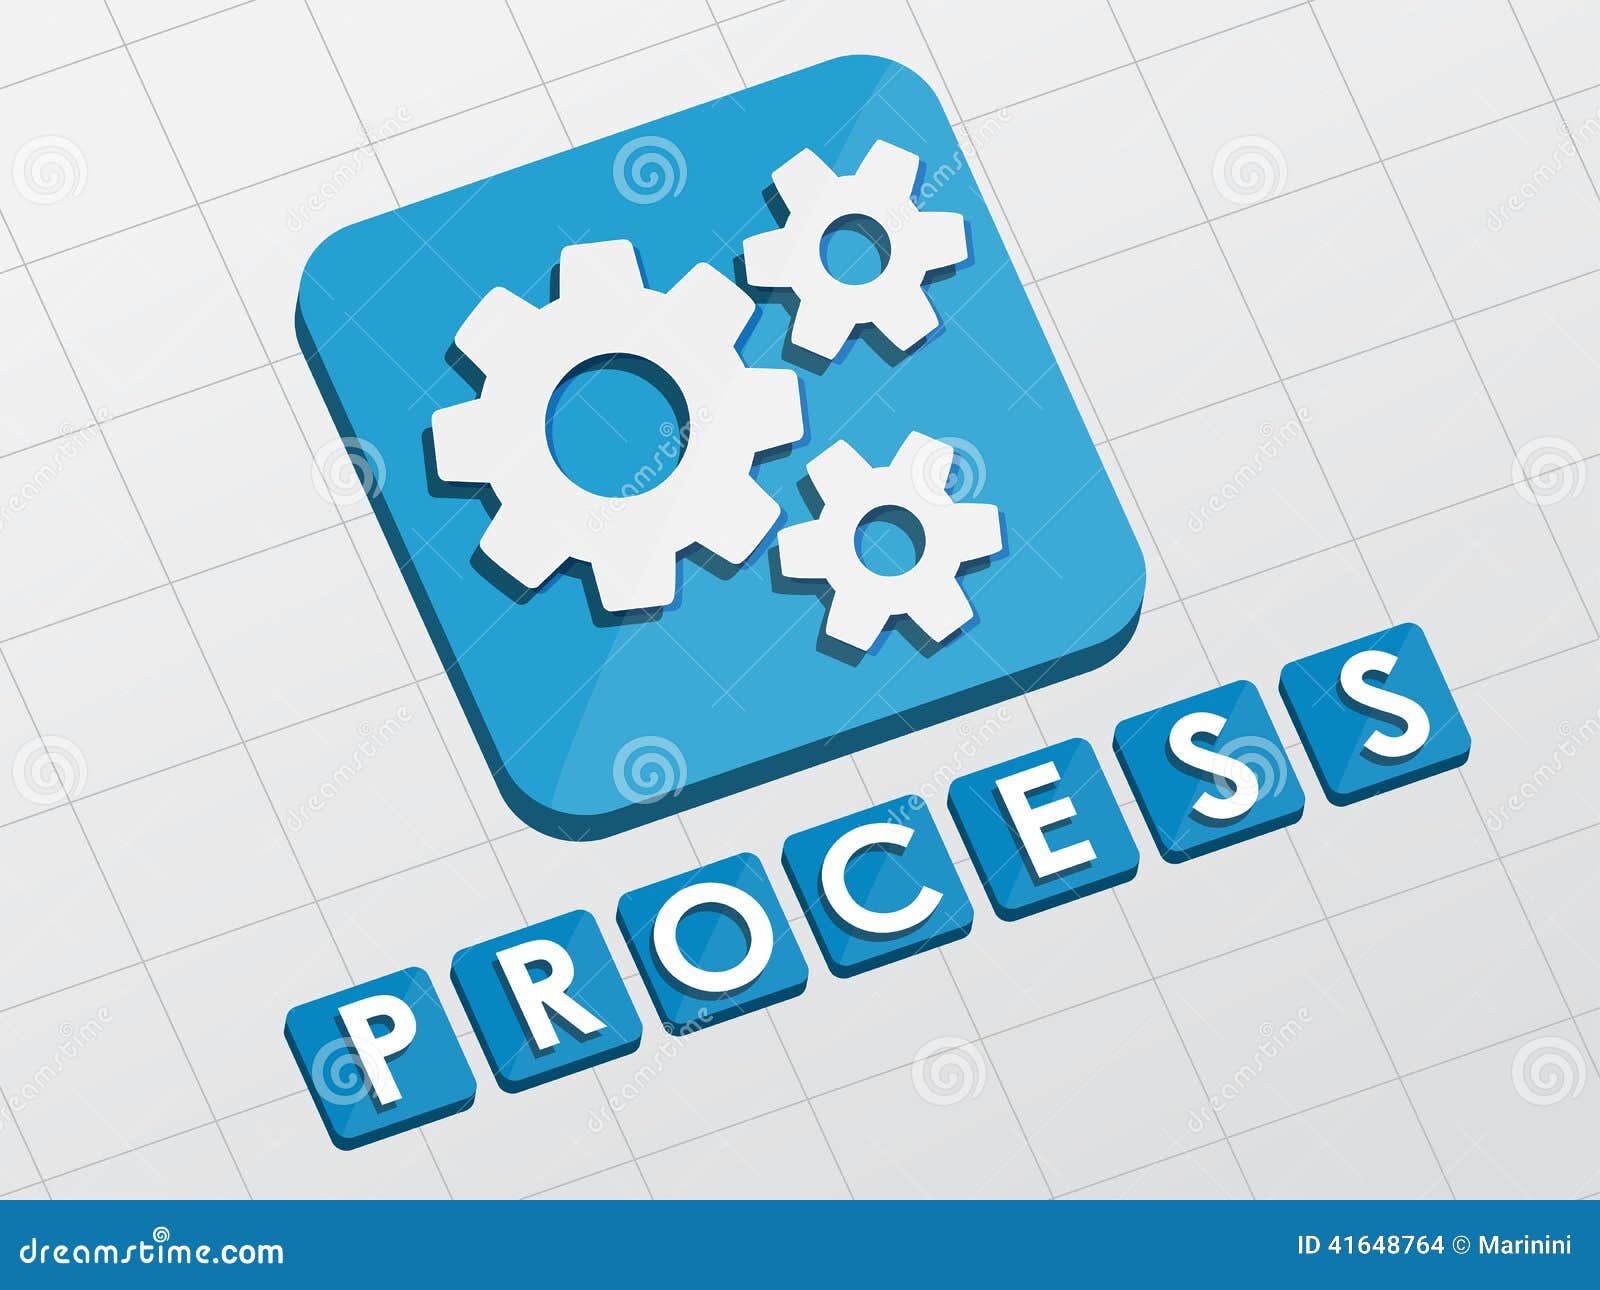 free clipart business process - photo #22